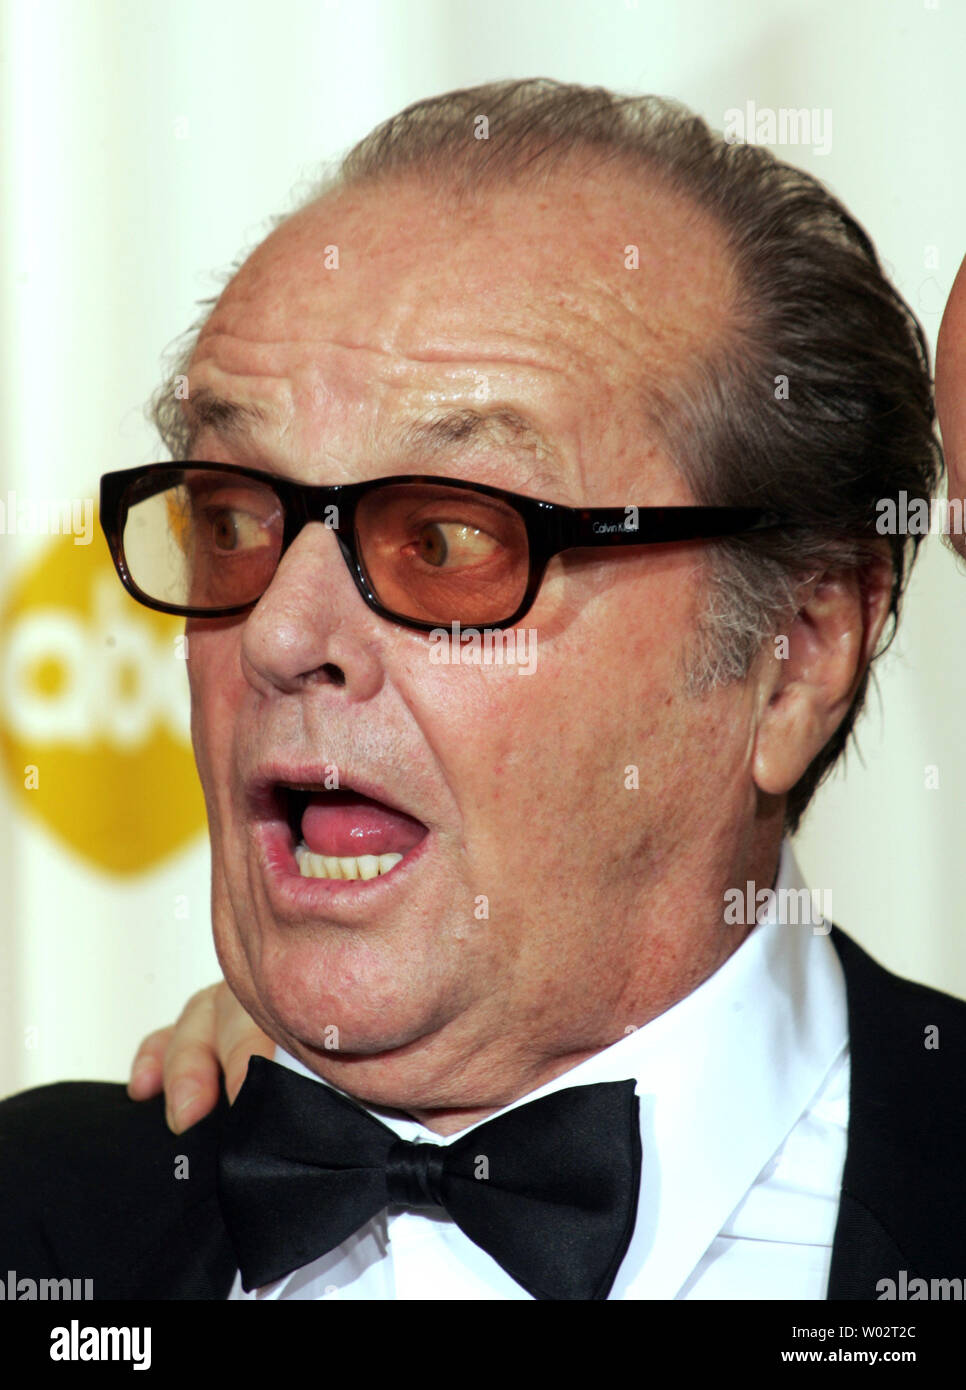 Actor Jack Nicholson reacts at the 78th Annual Academy Awards at the Kodak Theatre in Hollywood, Ca., on March 5, 2006.   (UPI Photo/Gary C. Caskey) Stock Photo